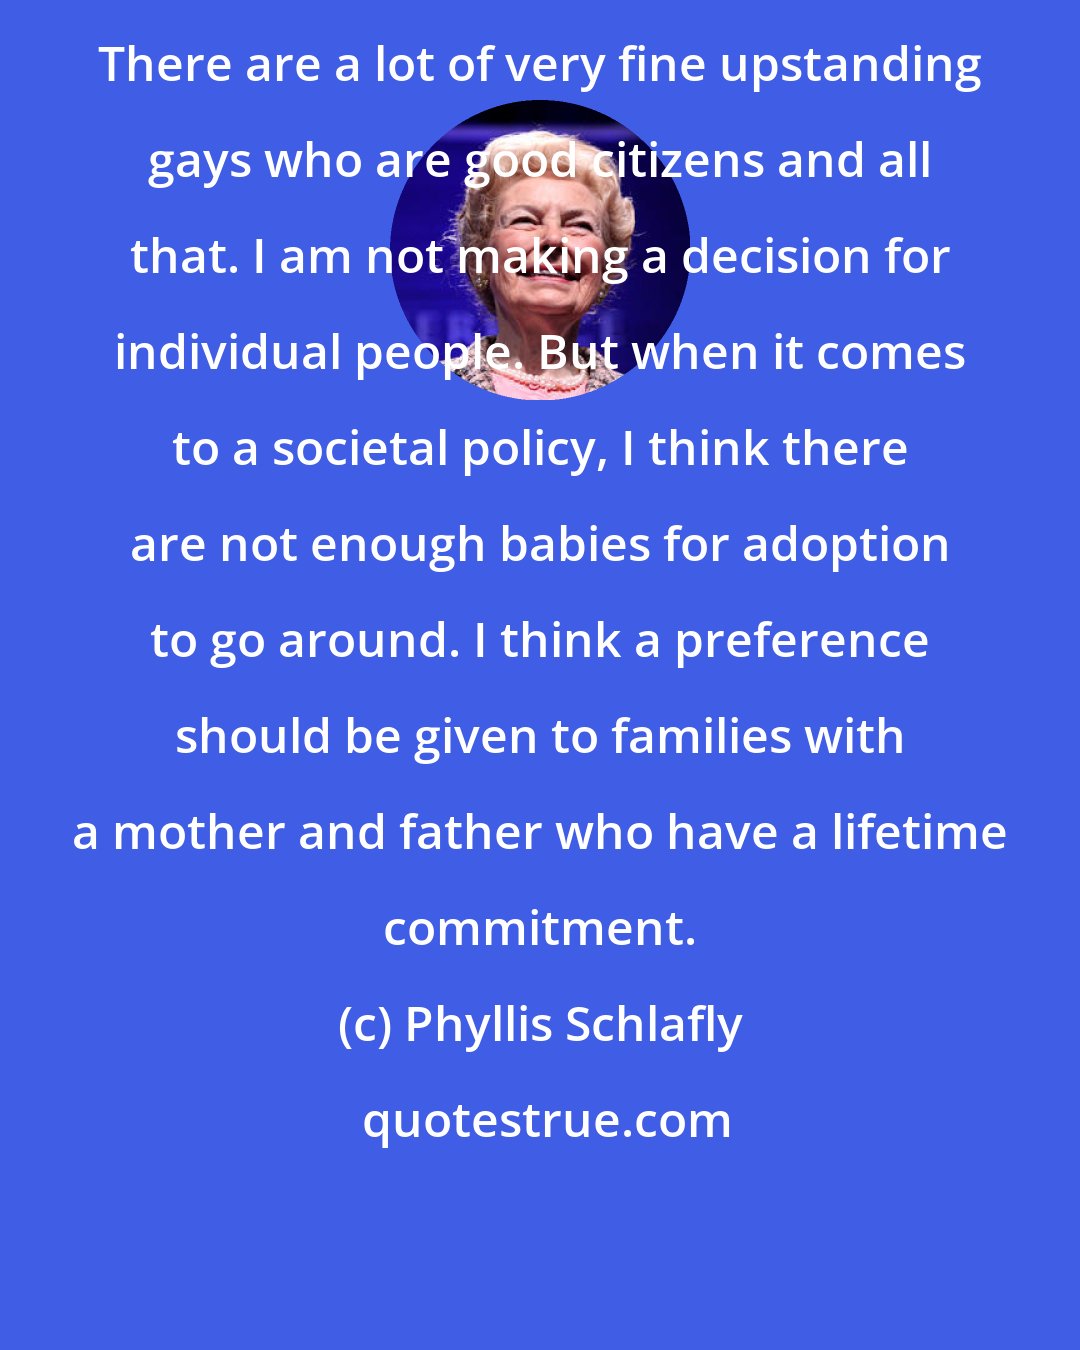 Phyllis Schlafly: There are a lot of very fine upstanding gays who are good citizens and all that. I am not making a decision for individual people. But when it comes to a societal policy, I think there are not enough babies for adoption to go around. I think a preference should be given to families with a mother and father who have a lifetime commitment.